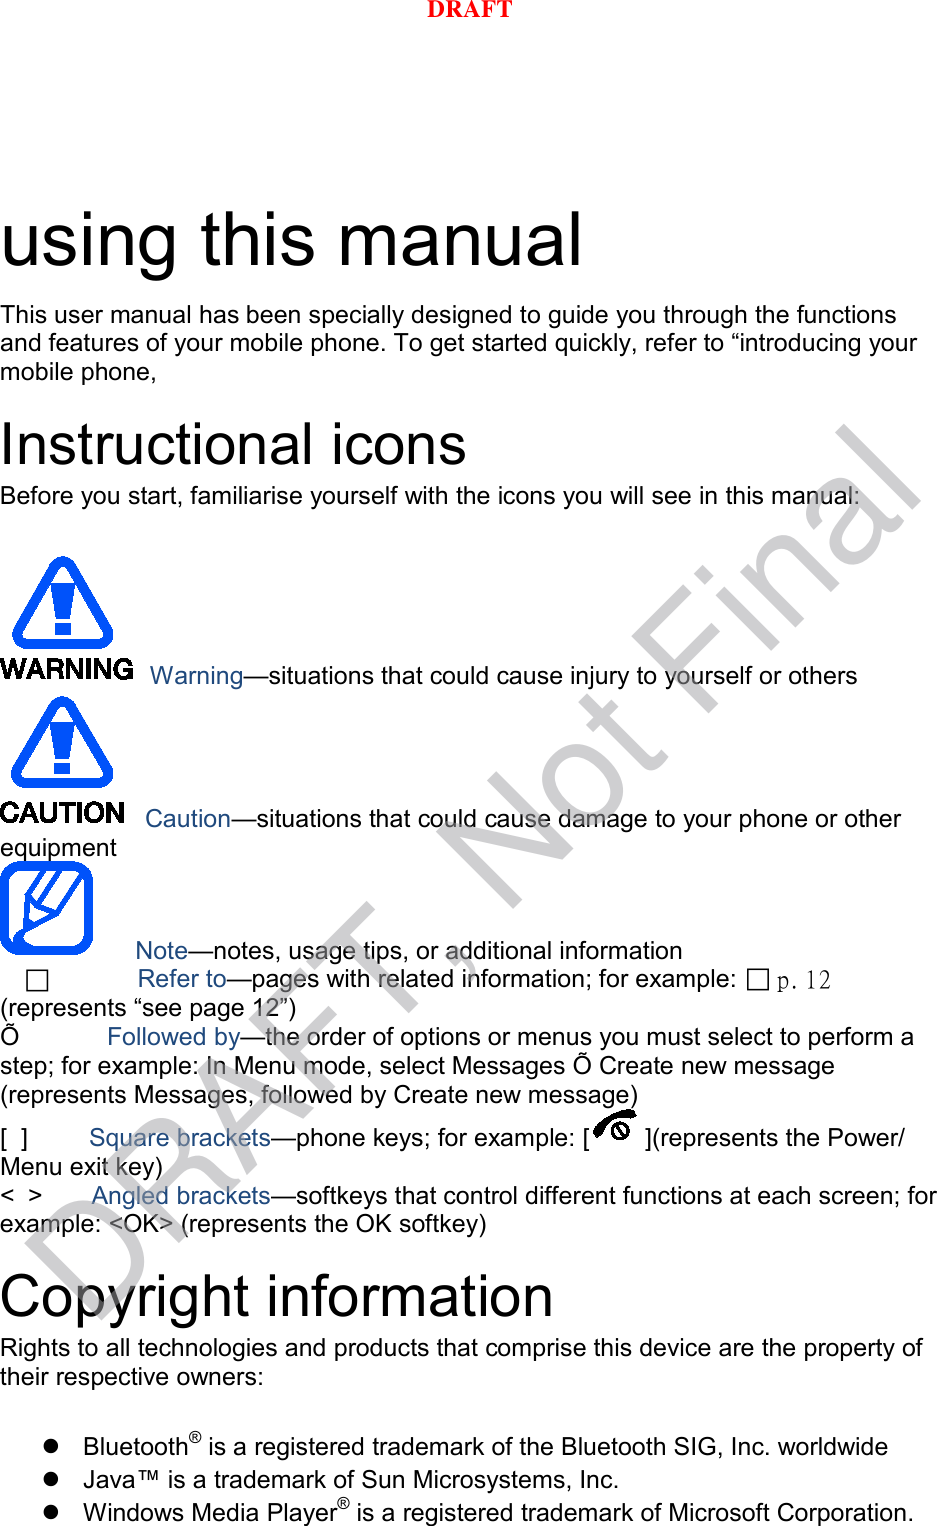 using this manual This user manual has been specially designed to guide you through the functions and features of your mobile phone. To get started quickly, refer to “introducing your mobile phone, Instructional icons Before you start, familiarise yourself with the icons you will see in this manual: Warning—situations that could cause injury to yourself or others Caution—situations that could cause damage to your phone or other equipment Note—notes, usage tips, or additional information          Refer to—pages with related information; for example:  p. 12(represents “see page 12”) Õ   Followed by—the order of options or menus you must select to perform a step; for example: In Menu mode, select Messages Õ Create new message (represents Messages, followed by Create new message) [  ]      Square brackets—phone keys; for example: [ ](represents the Power/ Menu exit key) &lt;  &gt;    Angled brackets—softkeys that control different functions at each screen; for example: &lt;OK&gt; (represents the OK softkey) Copyright information Rights to all technologies and products that comprise this device are the property of their respective owners: Bluetooth® is a registered trademark of the Bluetooth SIG, Inc. worldwideJava™ is a trademark of Sun Microsystems, Inc.Windows Media Player® is a registered trademark of Microsoft Corporation.DRAFT, Not FinalDRAFT